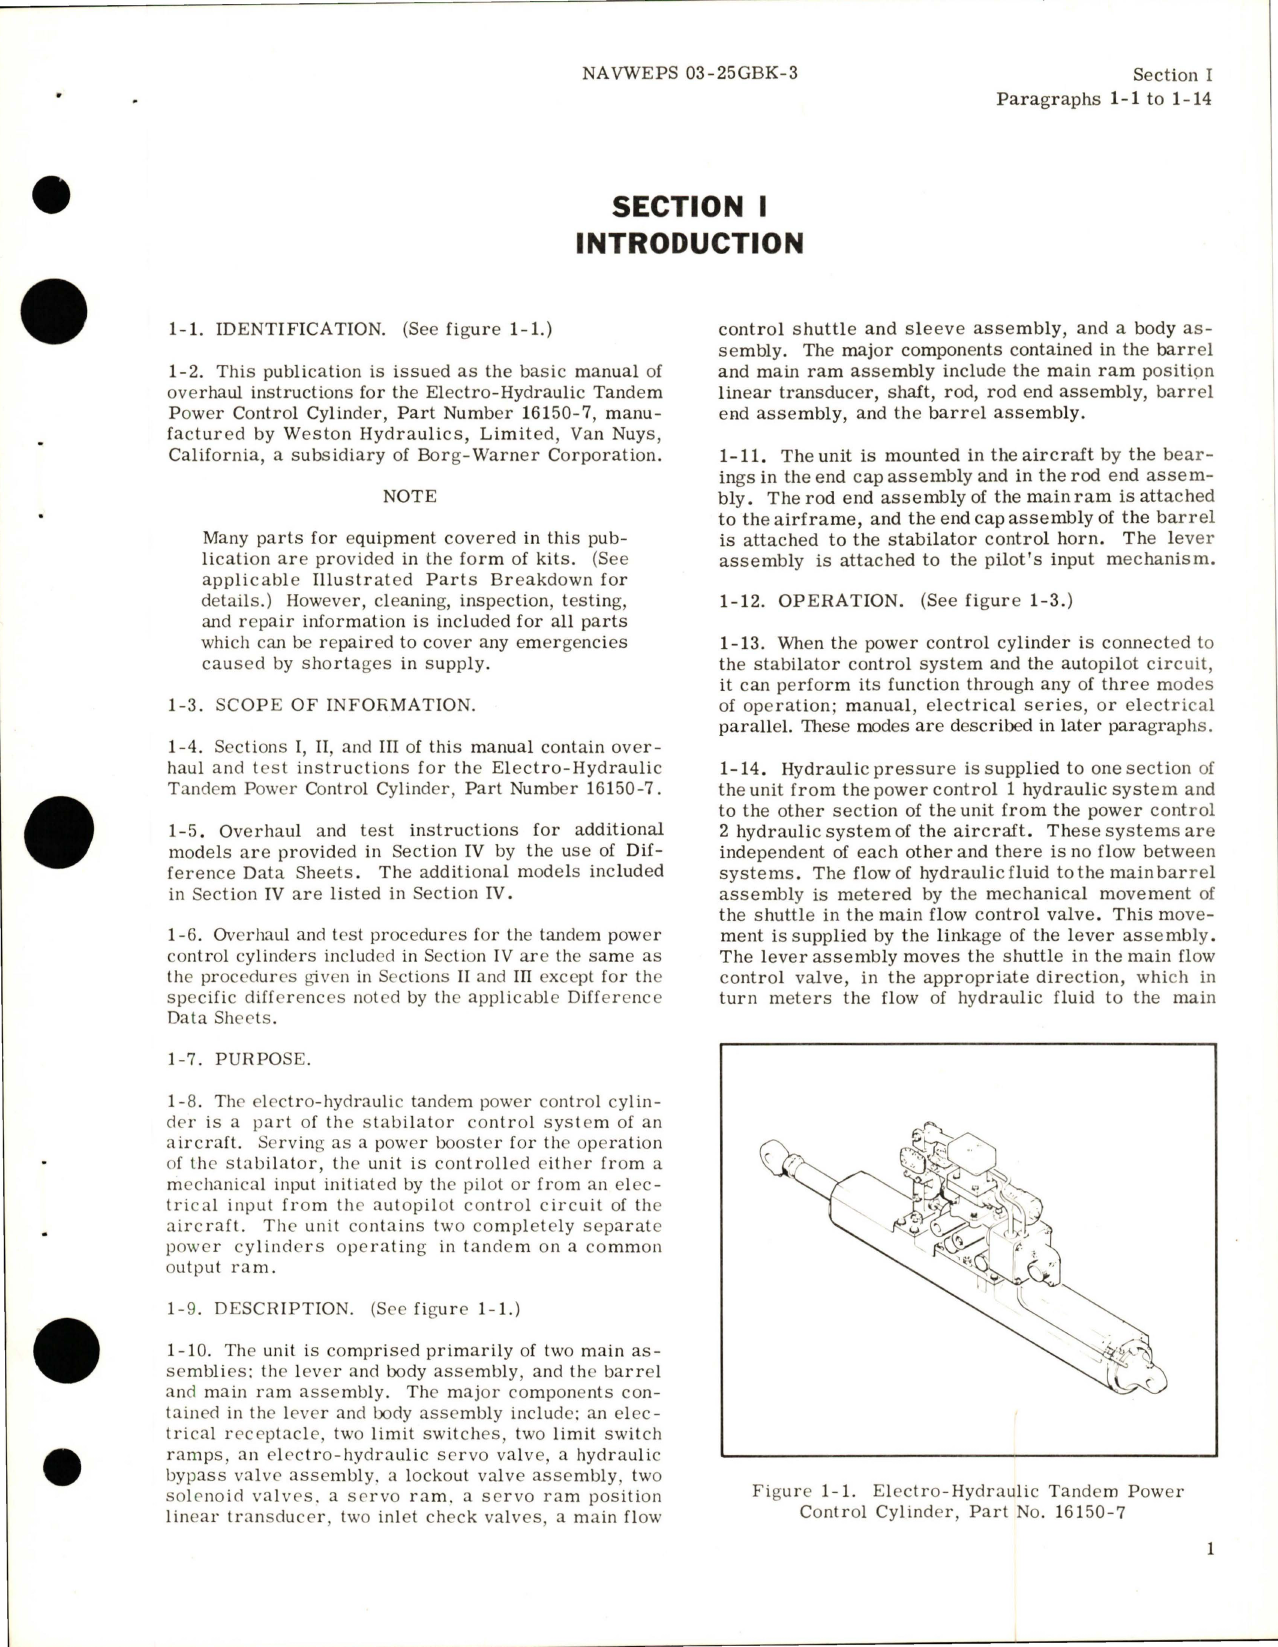 Sample page 7 from AirCorps Library document: Overhaul Instructions for Electro-Hydraulic Tandem Power Control Cylinder - Parts 16150-7, 16150-8, 16150-11, and 16150-12 